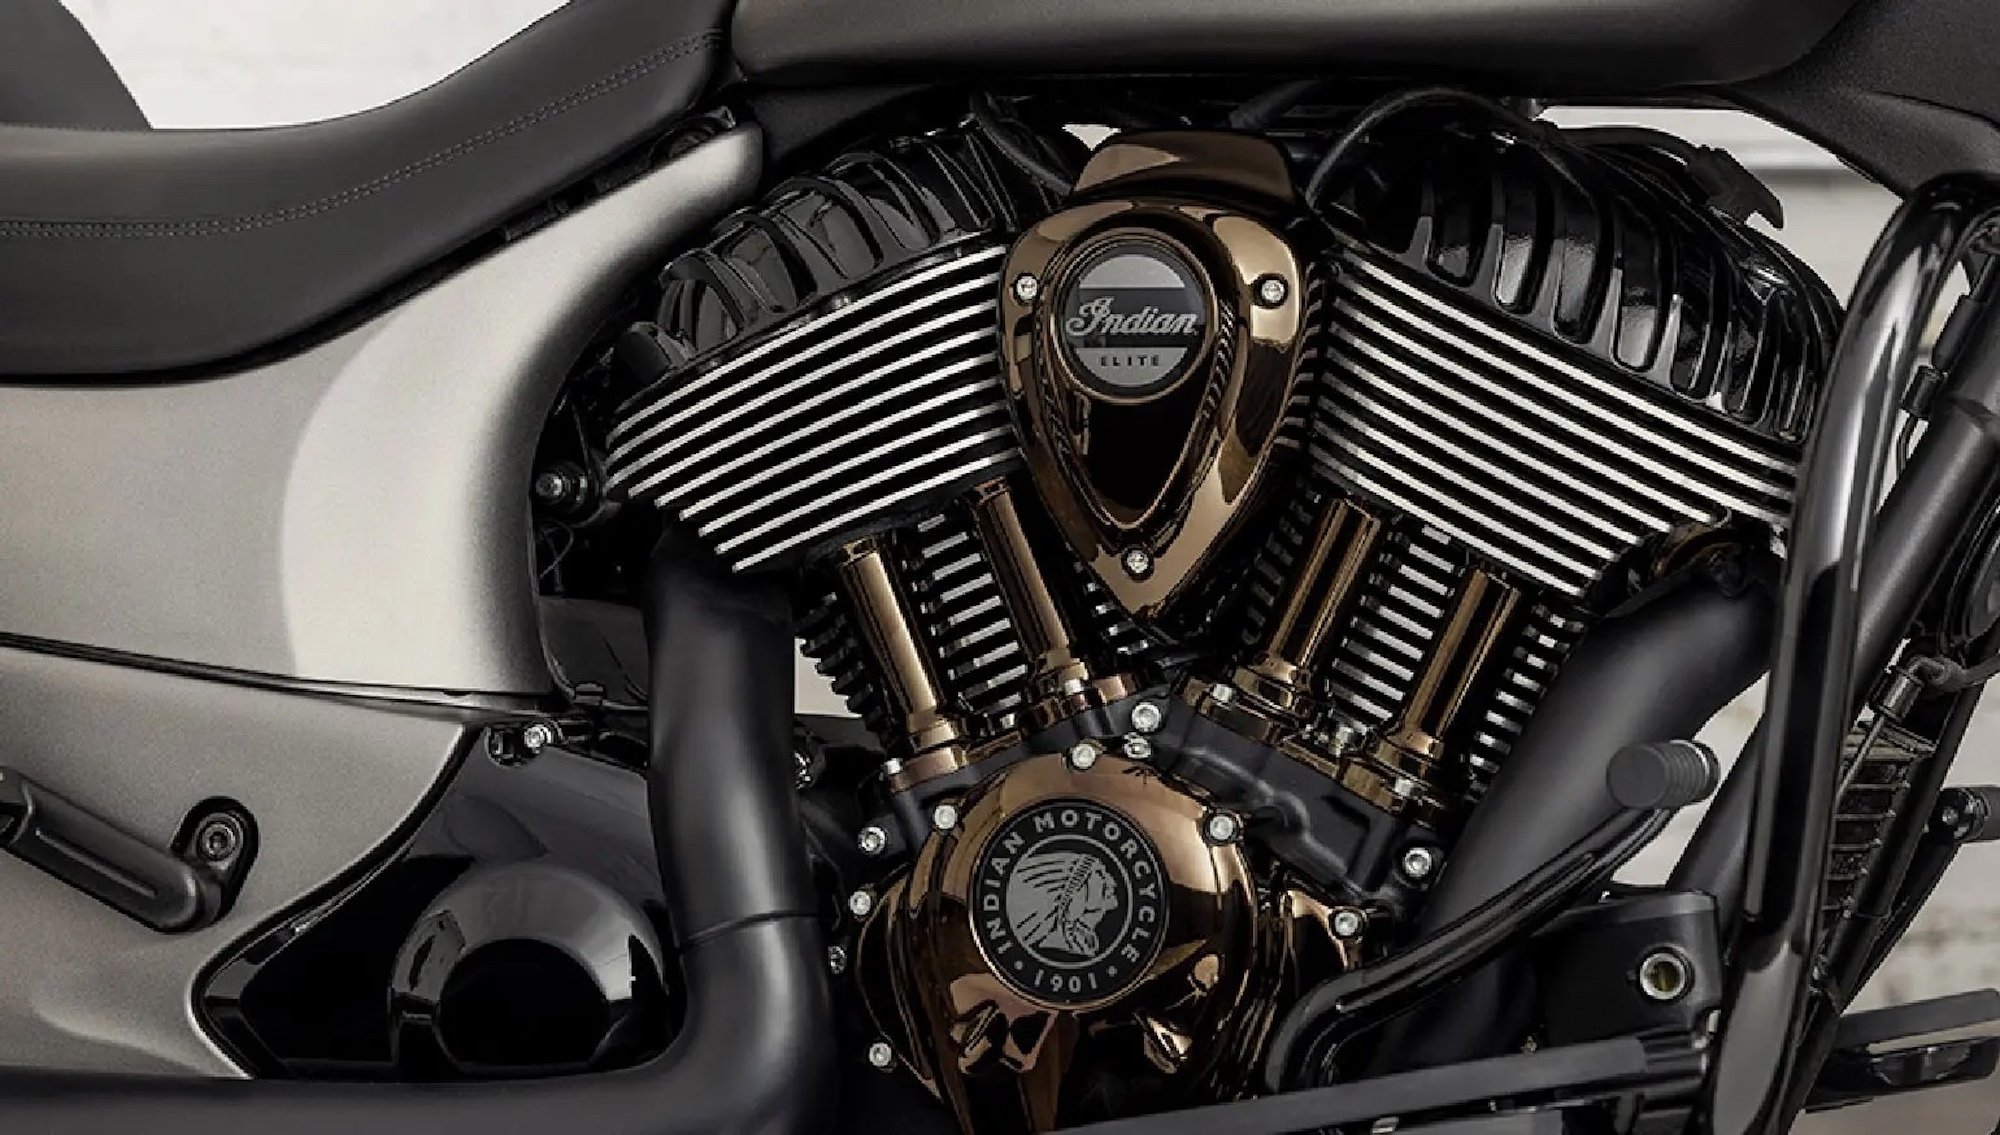 A close-up of an air-cooled 49-degree V-Twin Indian engine.